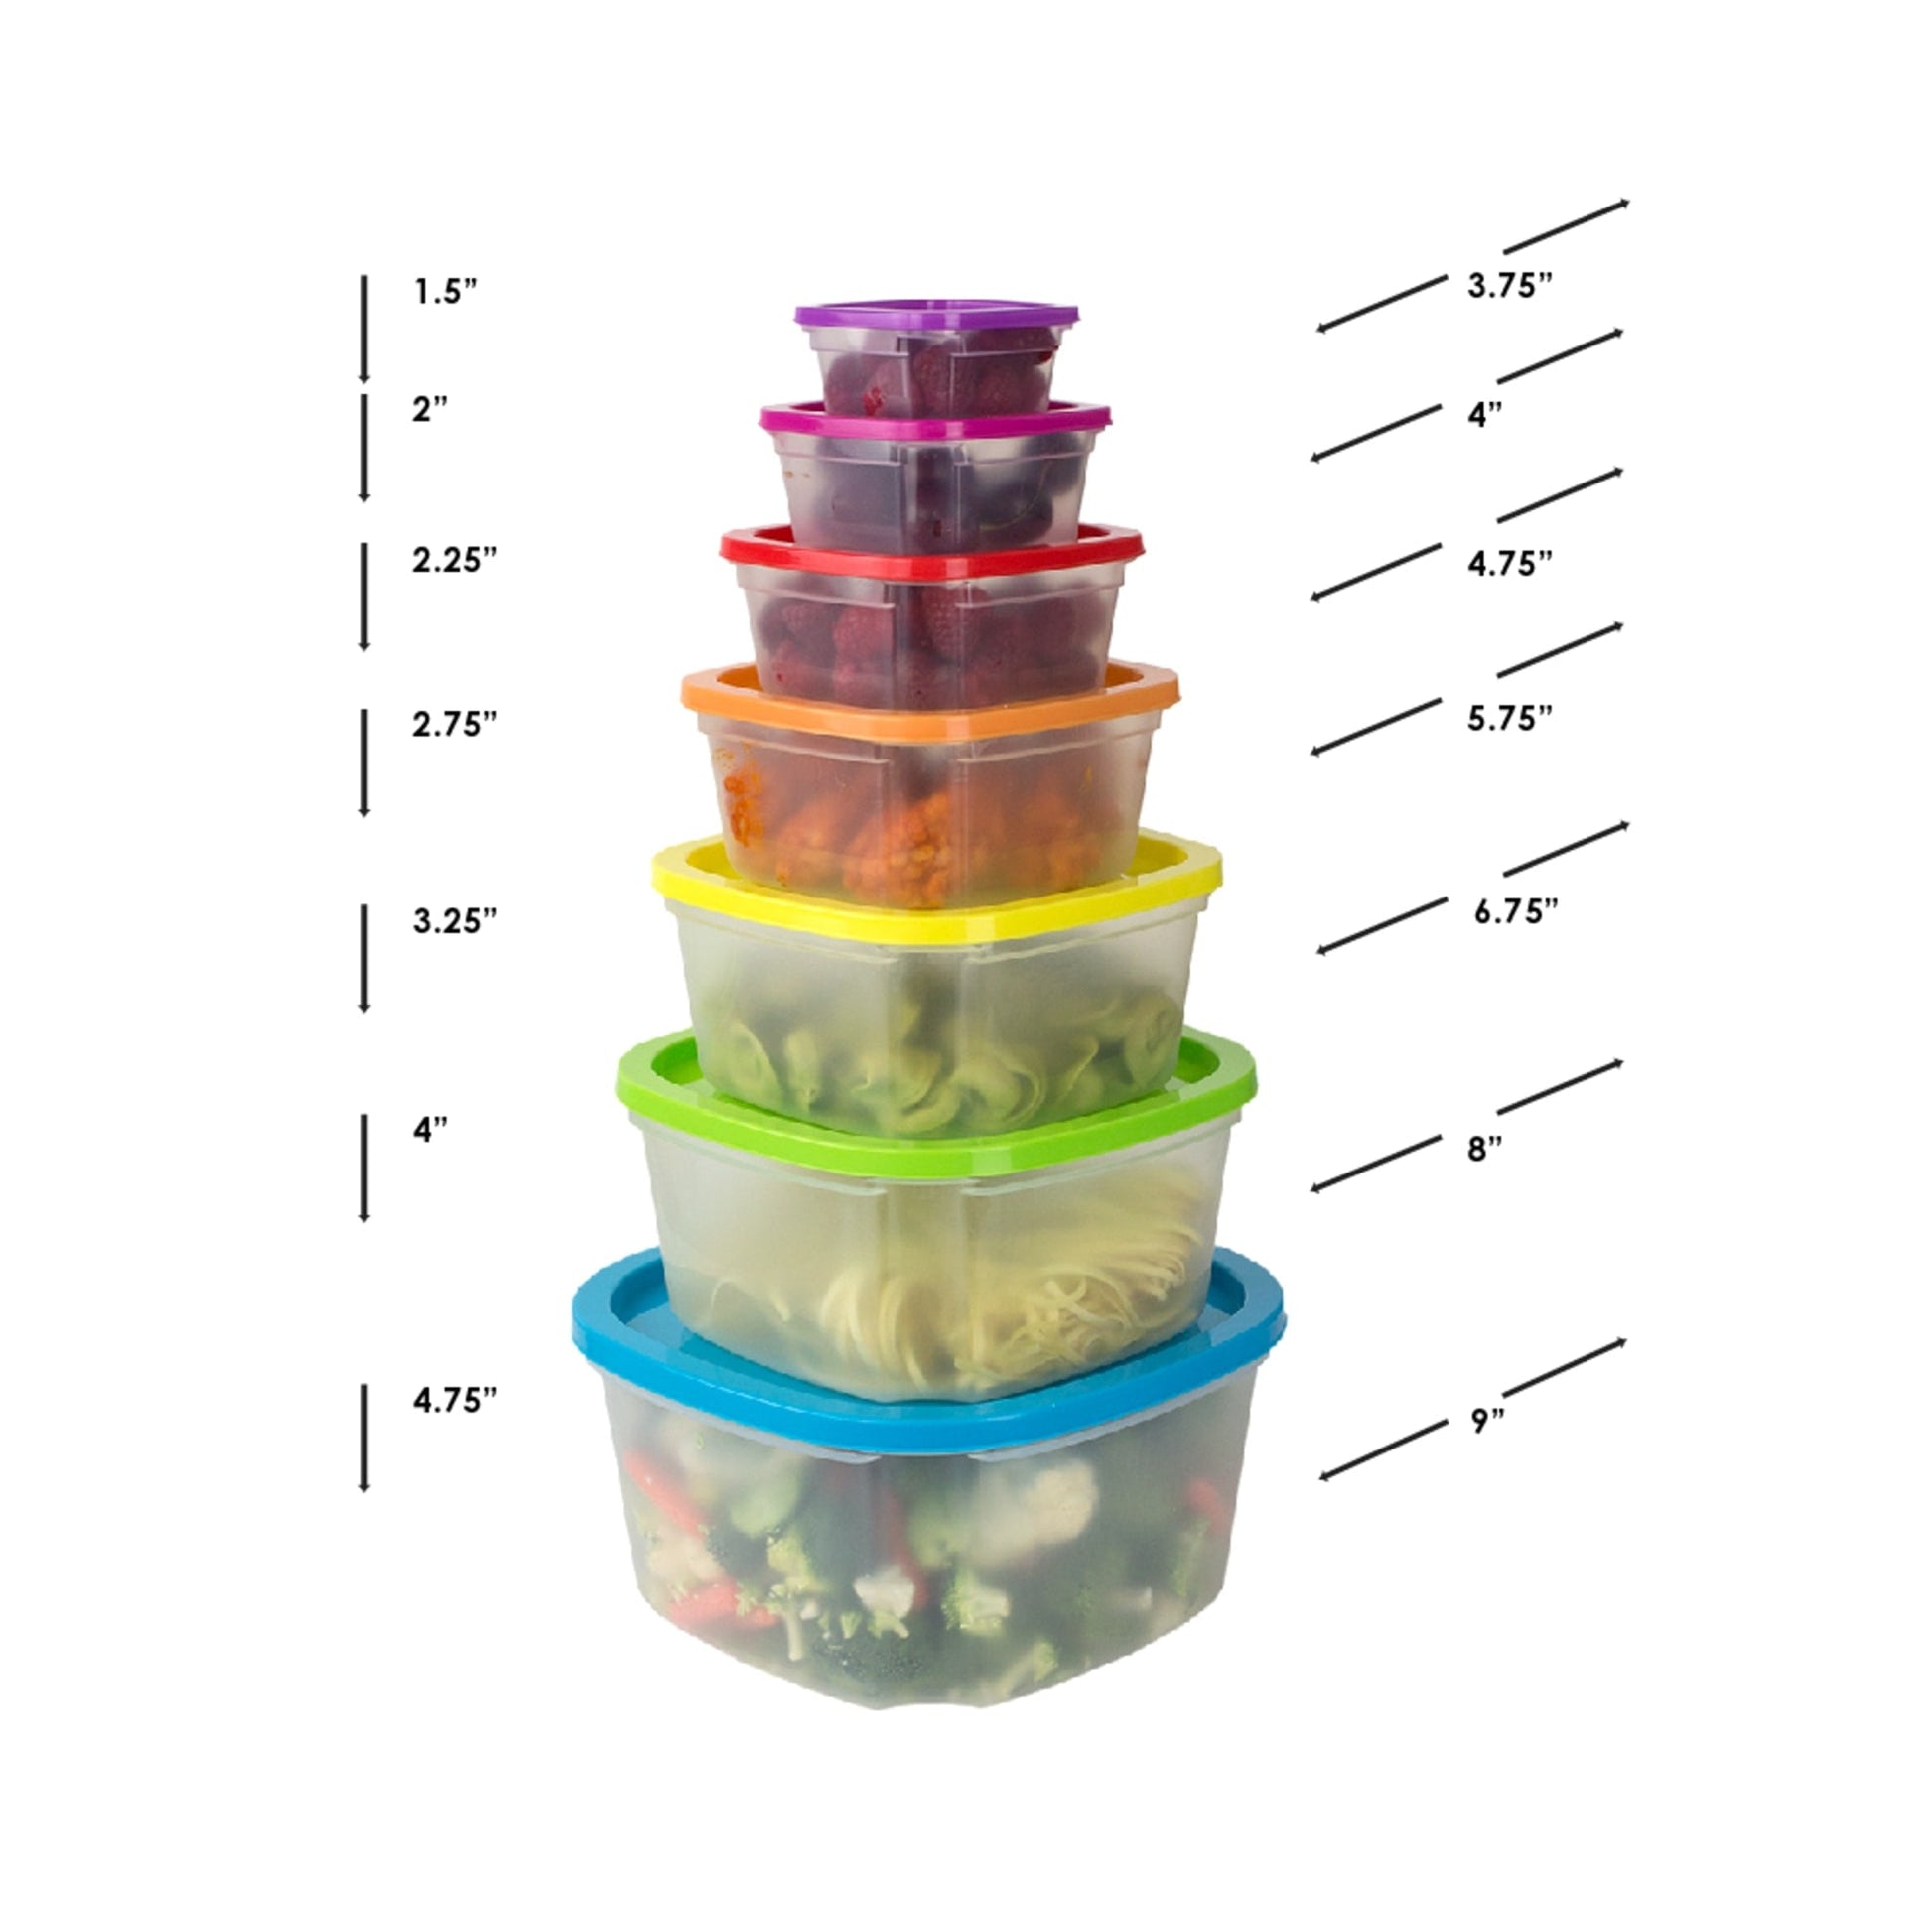 700ml 1-5PC Square Glass Food Storage Clear Storage Containers